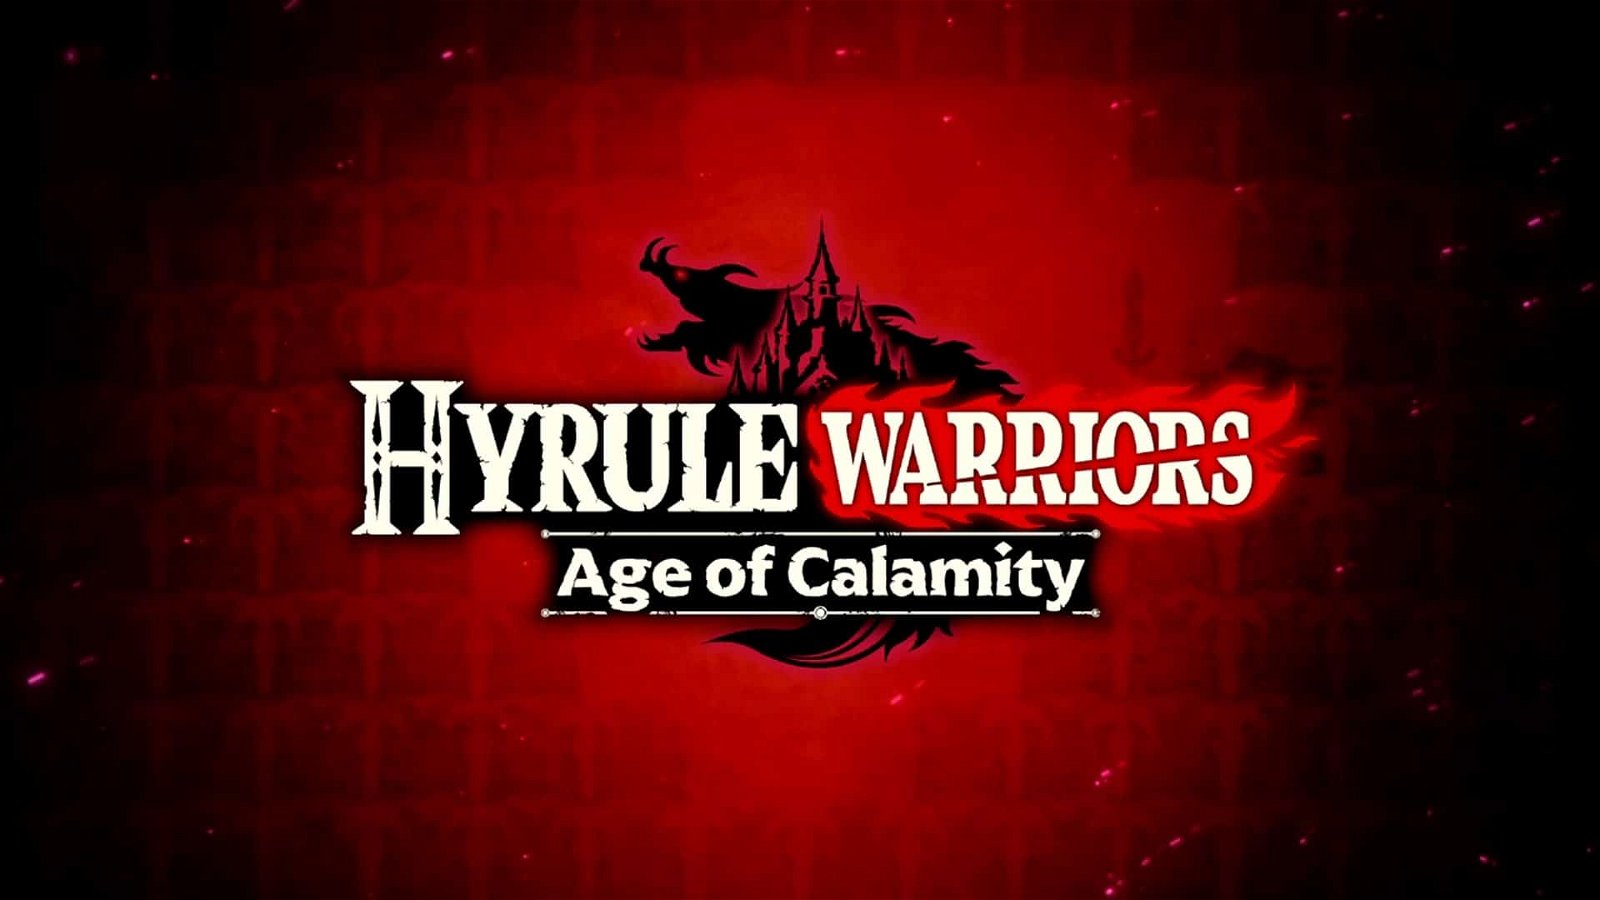 Hyrule Warriors: Age of Calamity Launches Exclusively for Nintendo Switch  on Nov. 20